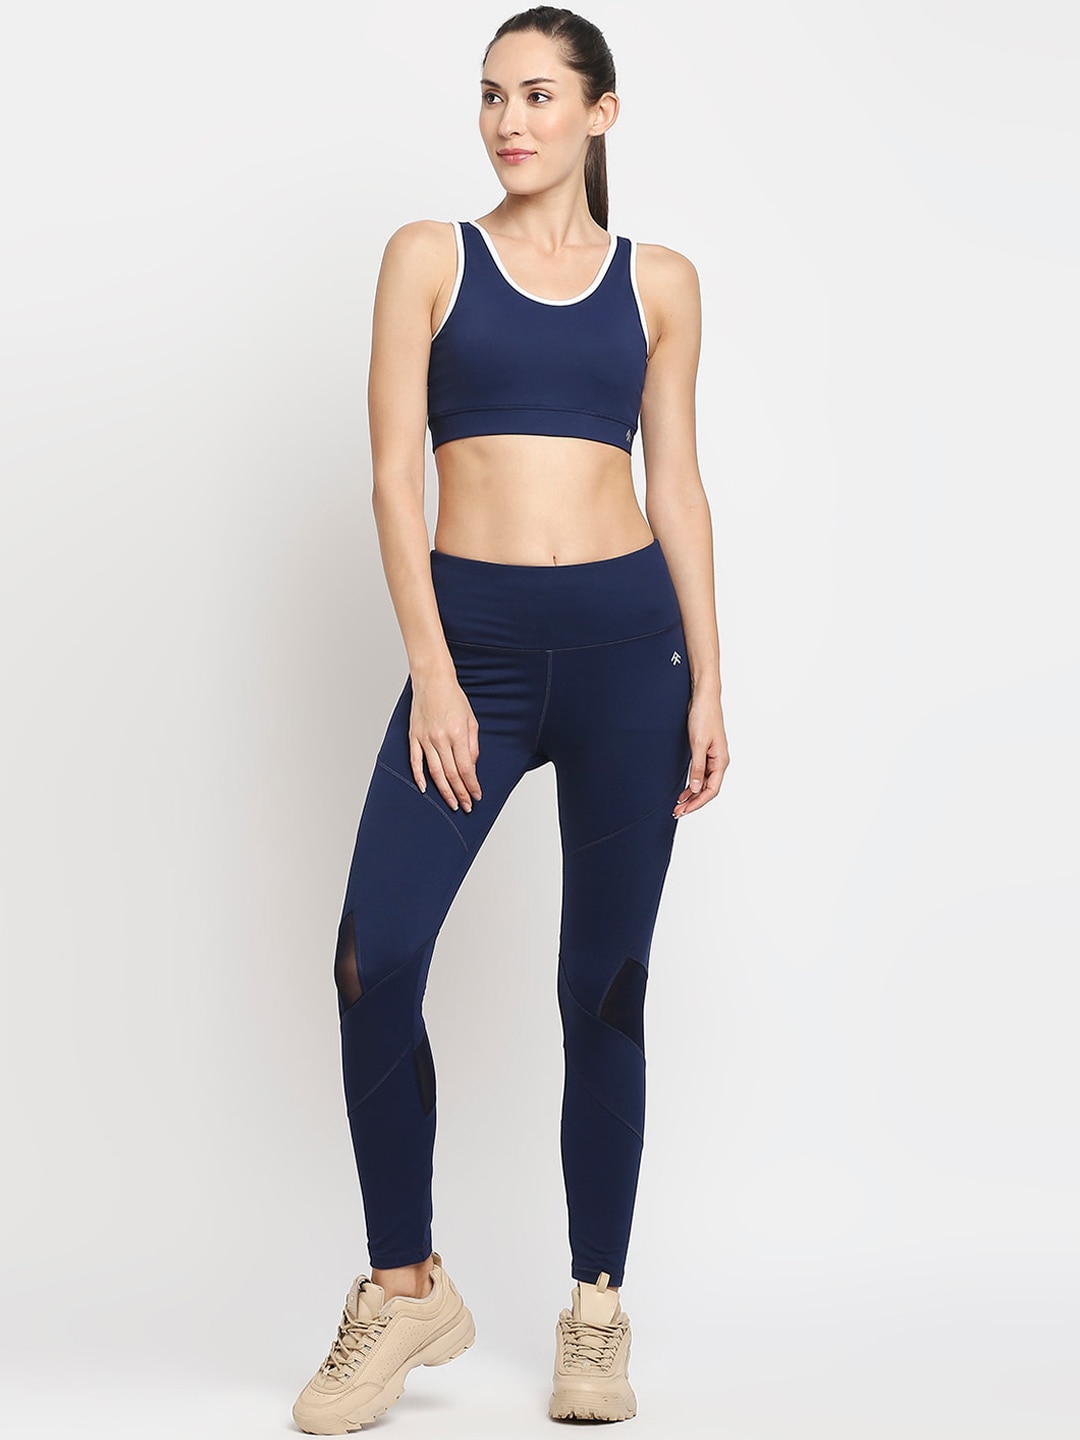 Tuna London Women Blue Patched Sports Bra With High Compression Tights Price in India